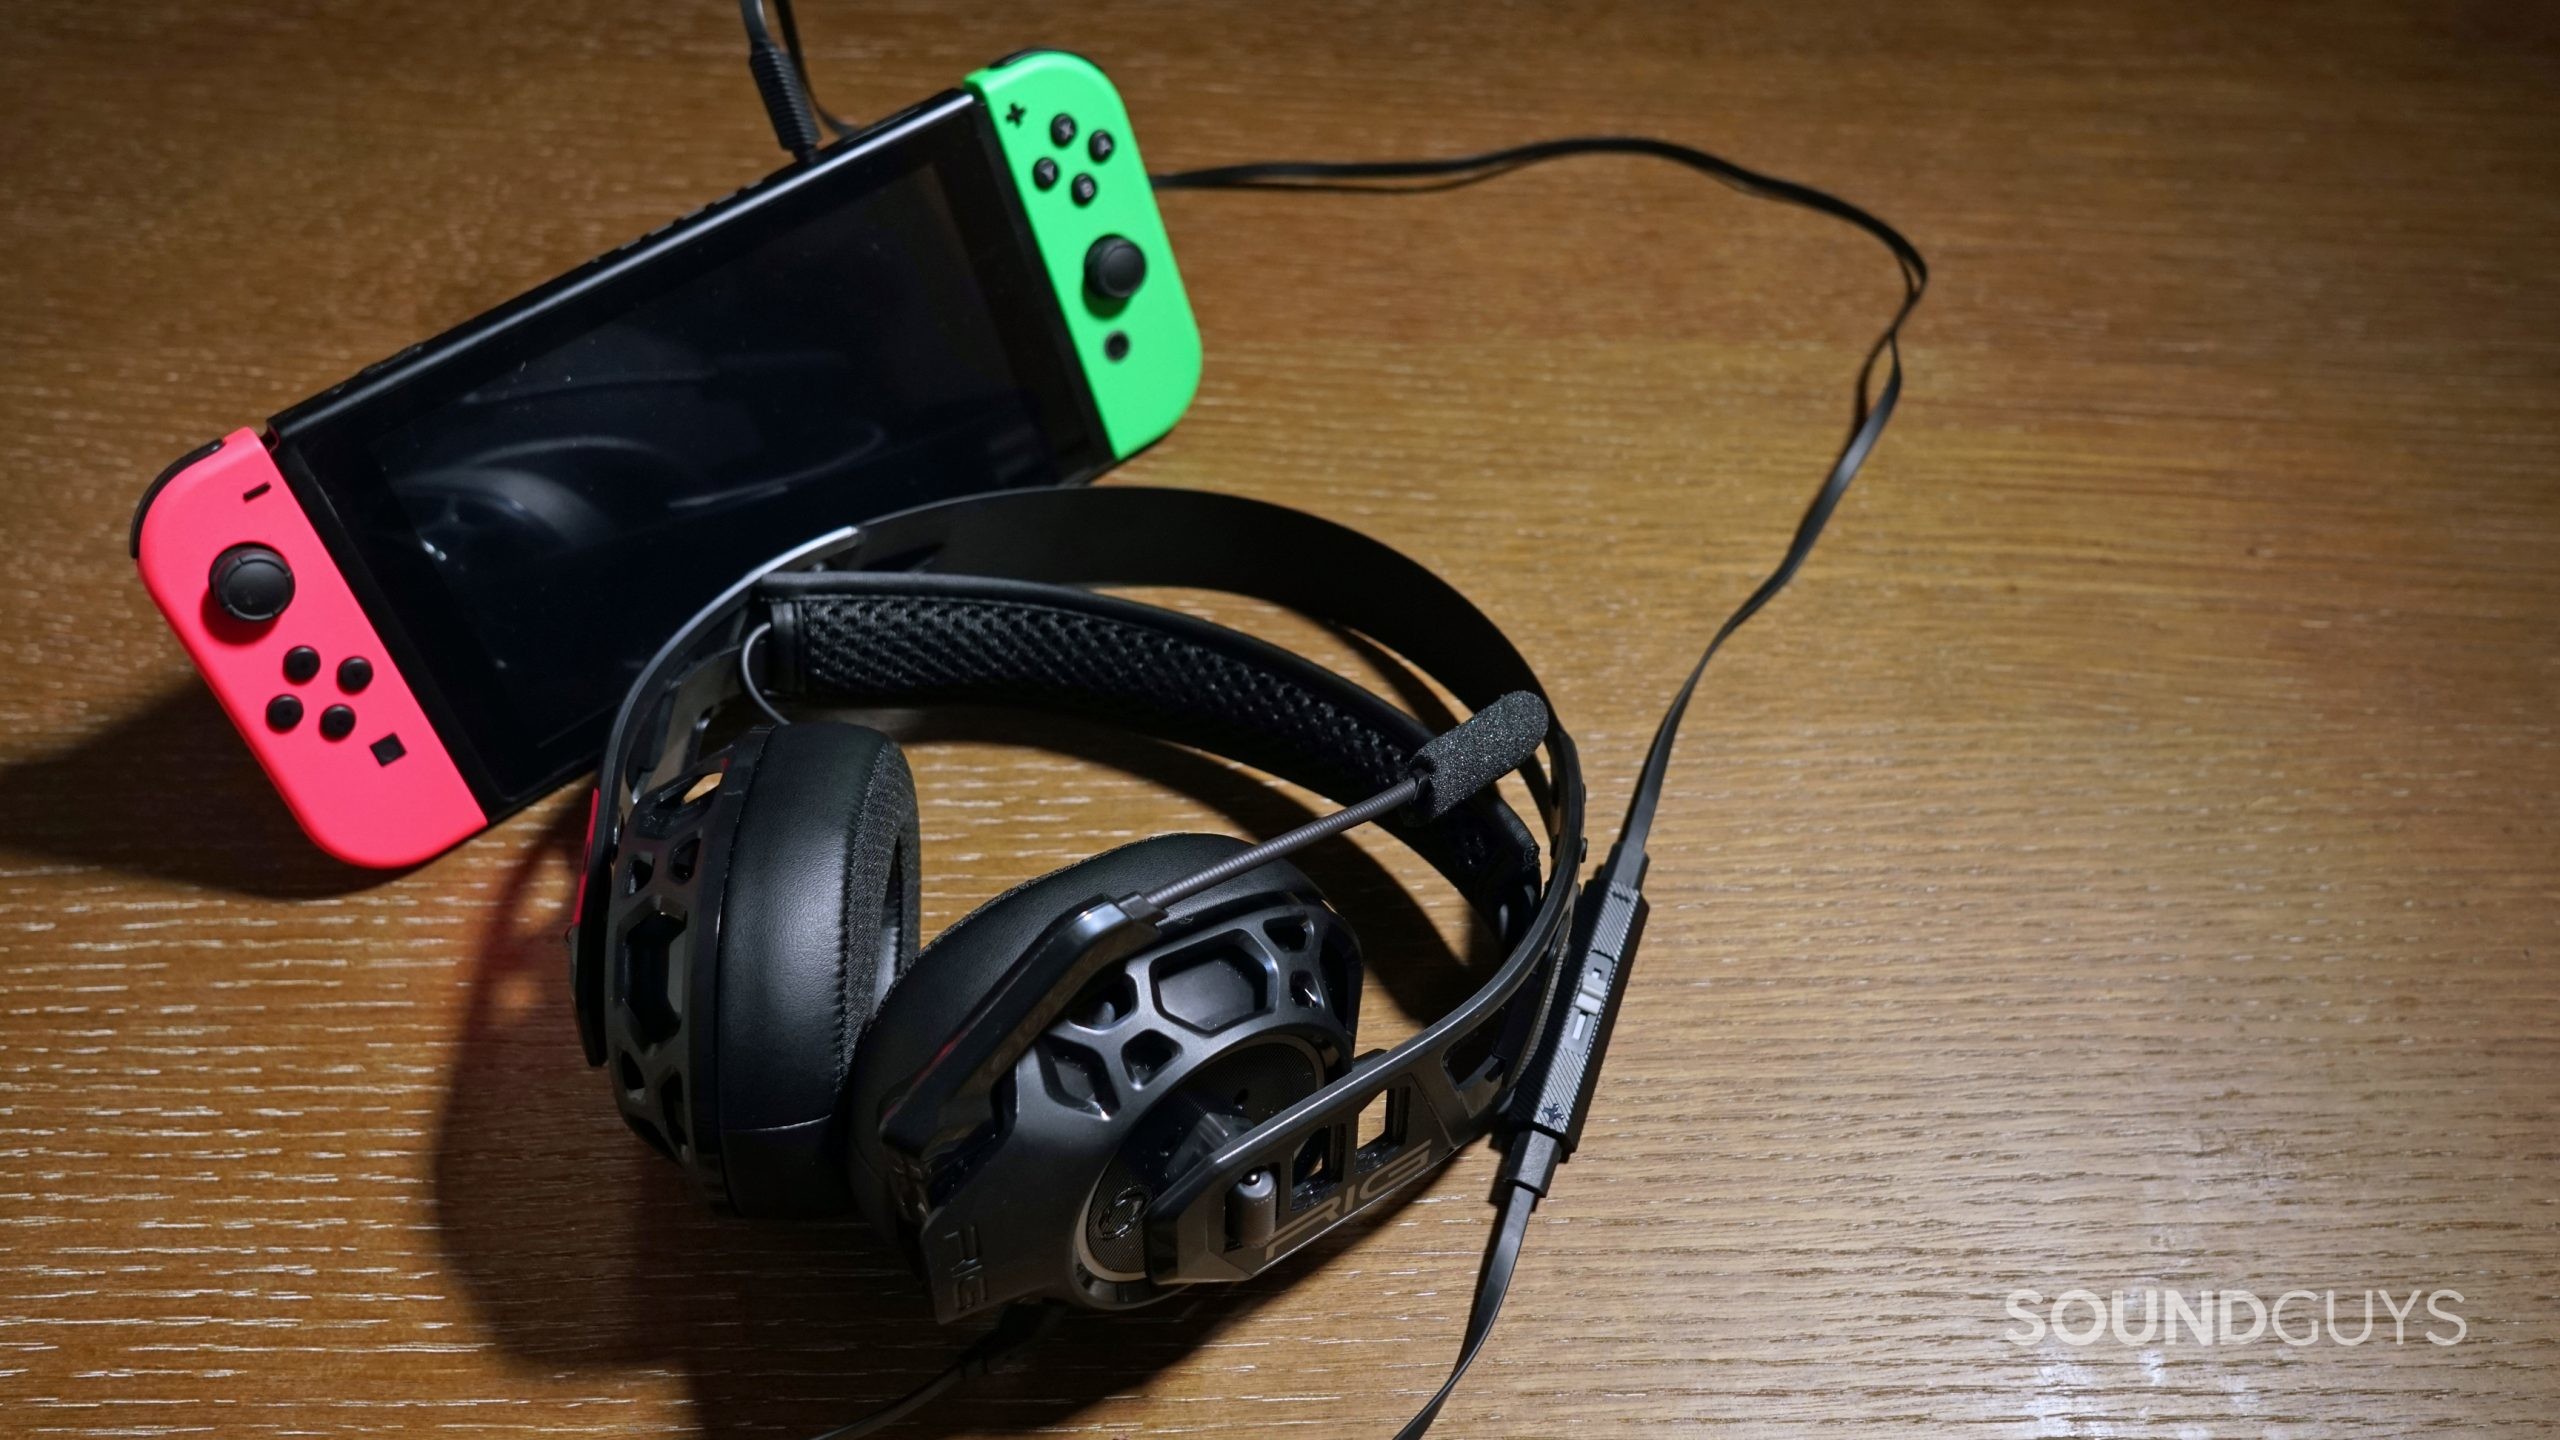 The Nacon RIG 500 Pro HC gaming headset lays on a wooden table plugged into a Nintendo Switch.